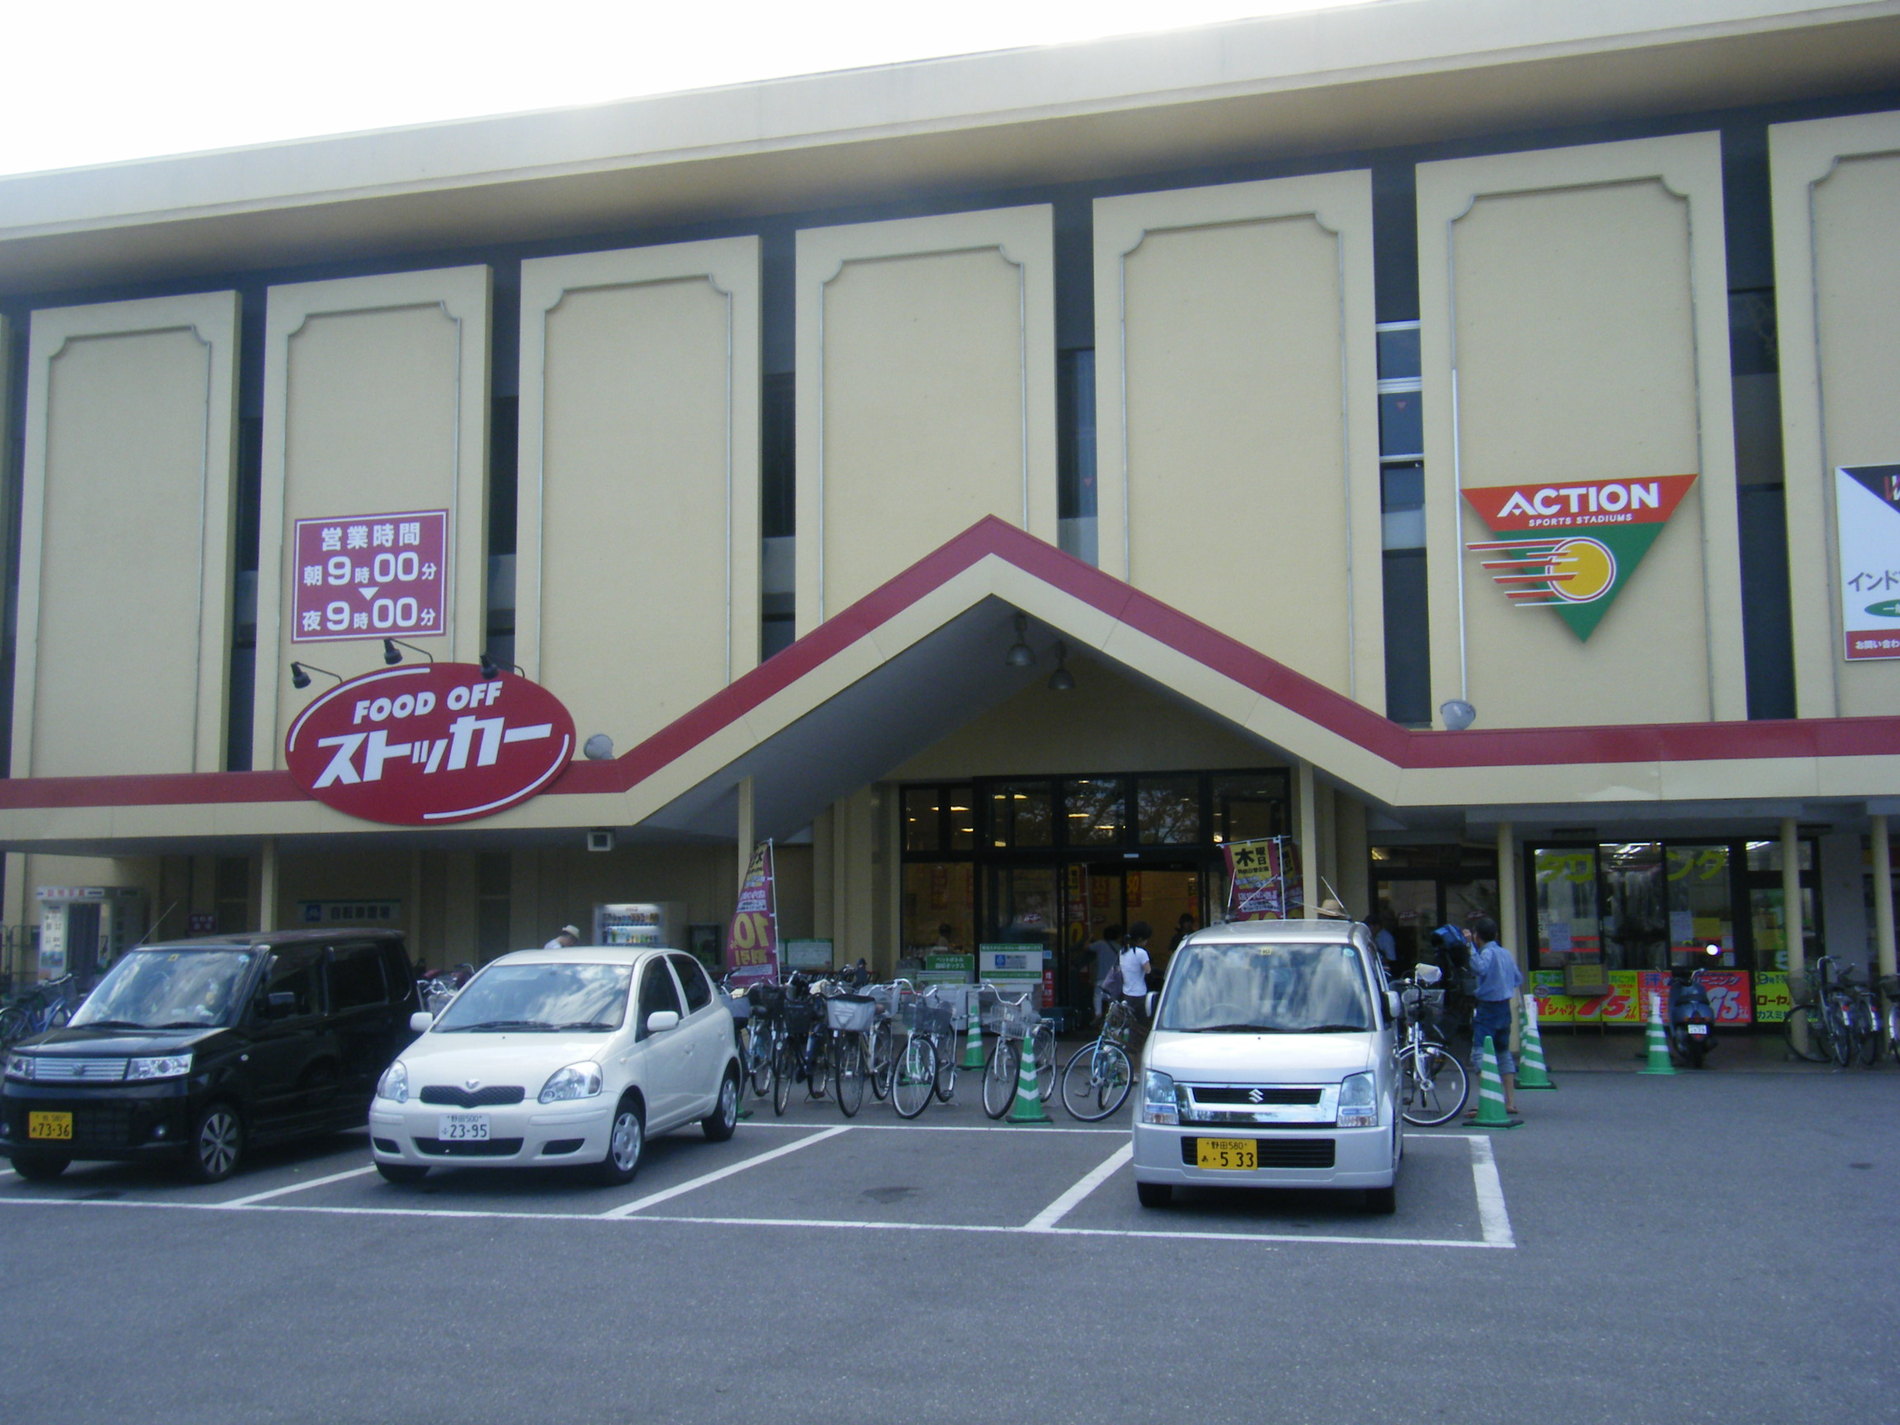 Other Environmental Photo. Until "FOOD OFF stocker Kashiwa central store" 1290m 9:00 AM ~ 9:00 PM Sales